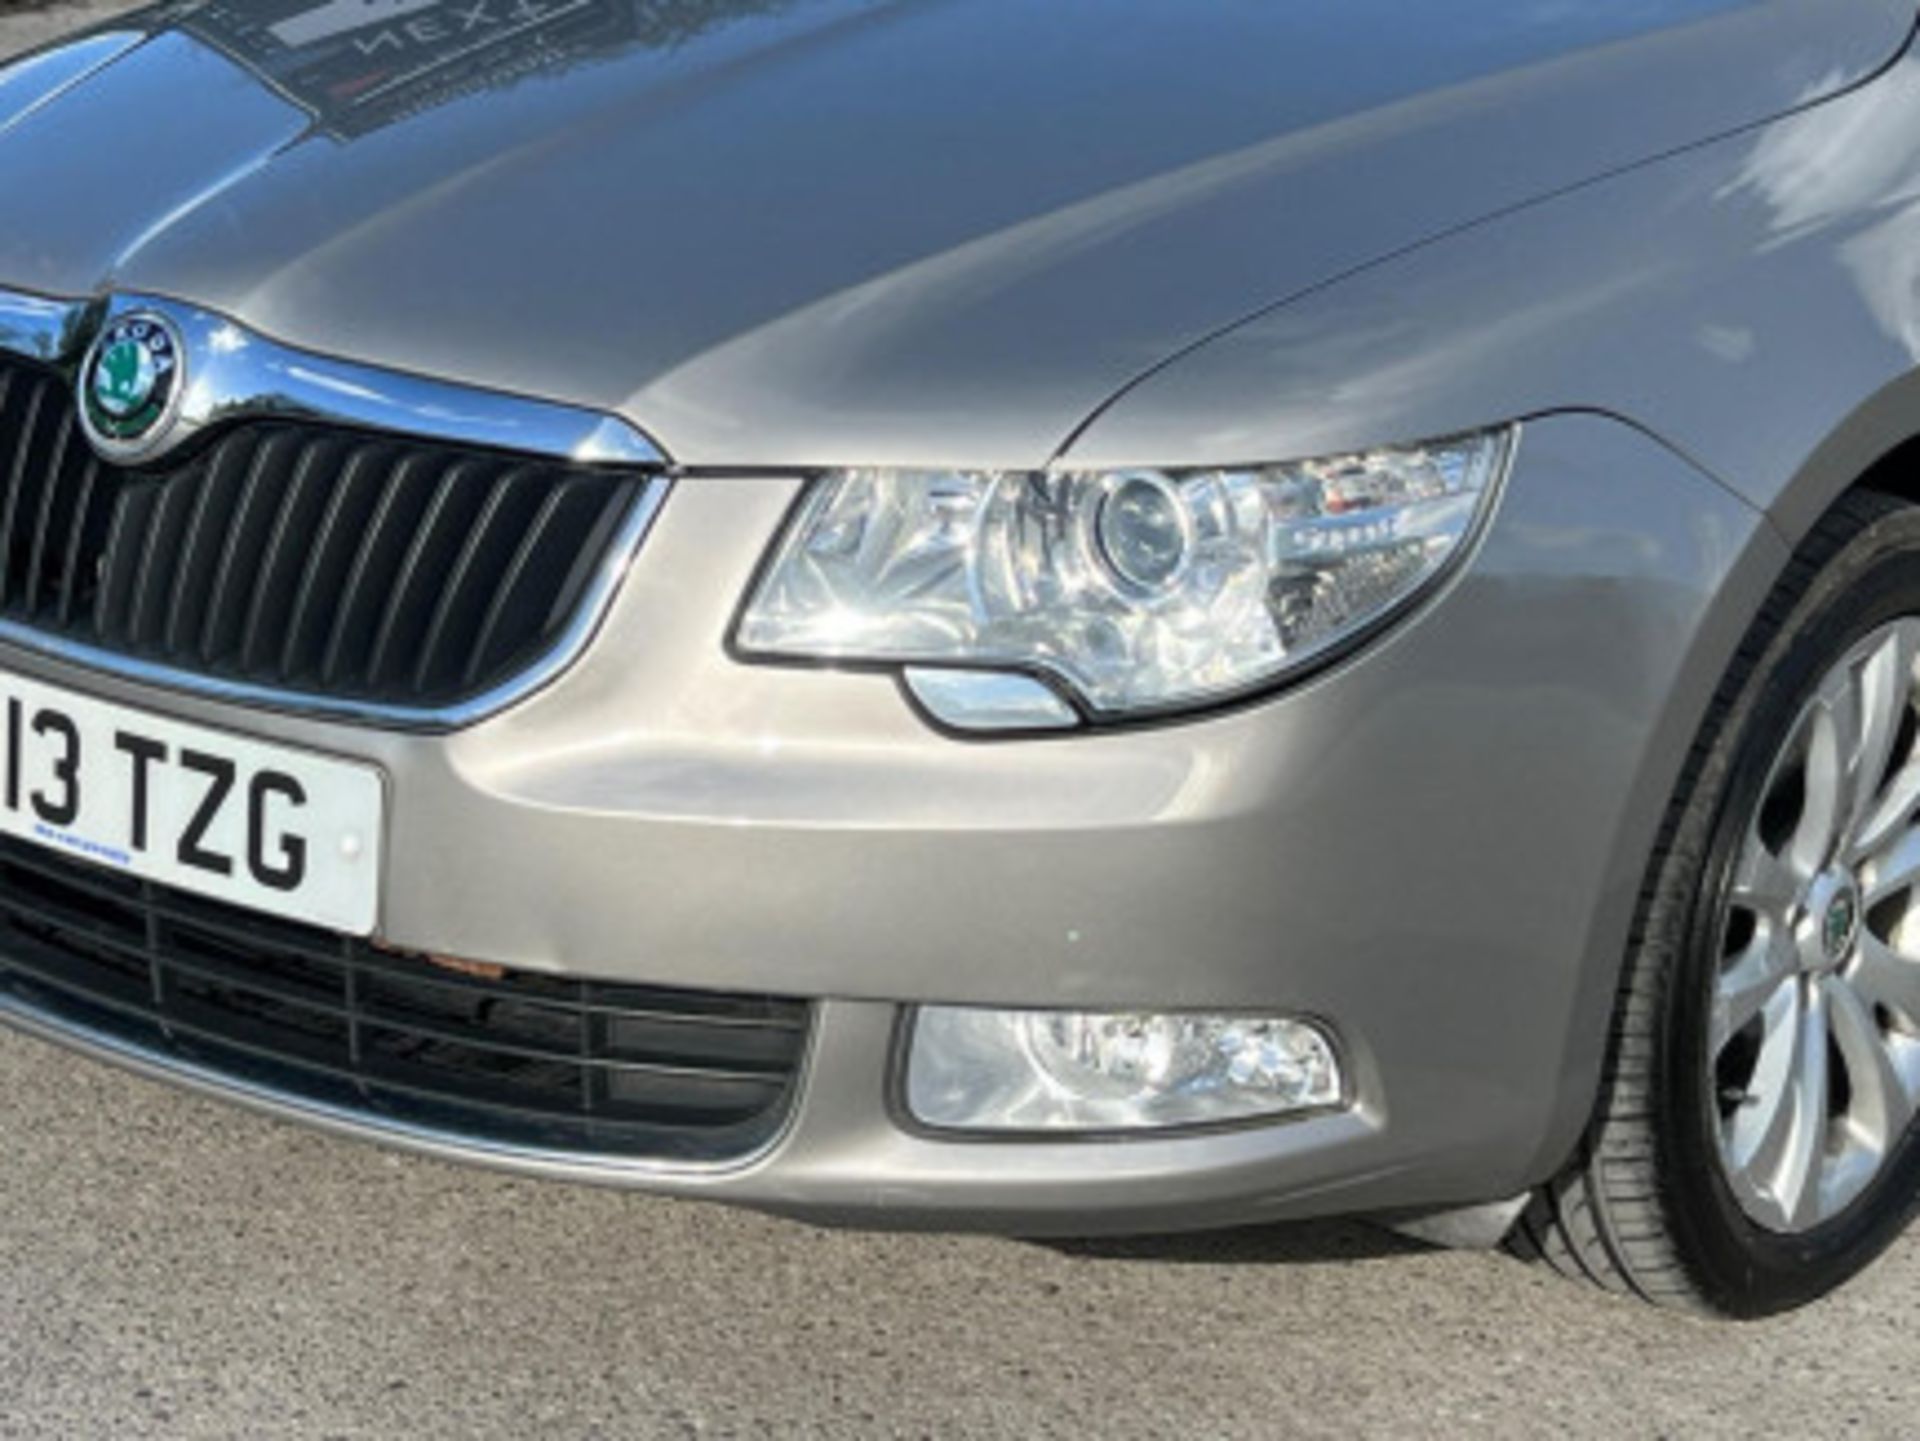 >>--NO VAT ON HAMMER--<<STYLISH AND RELIABLE SKODA SUPERB 1.6 TDI S GREENLINE II EURO 5 - Image 53 of 141